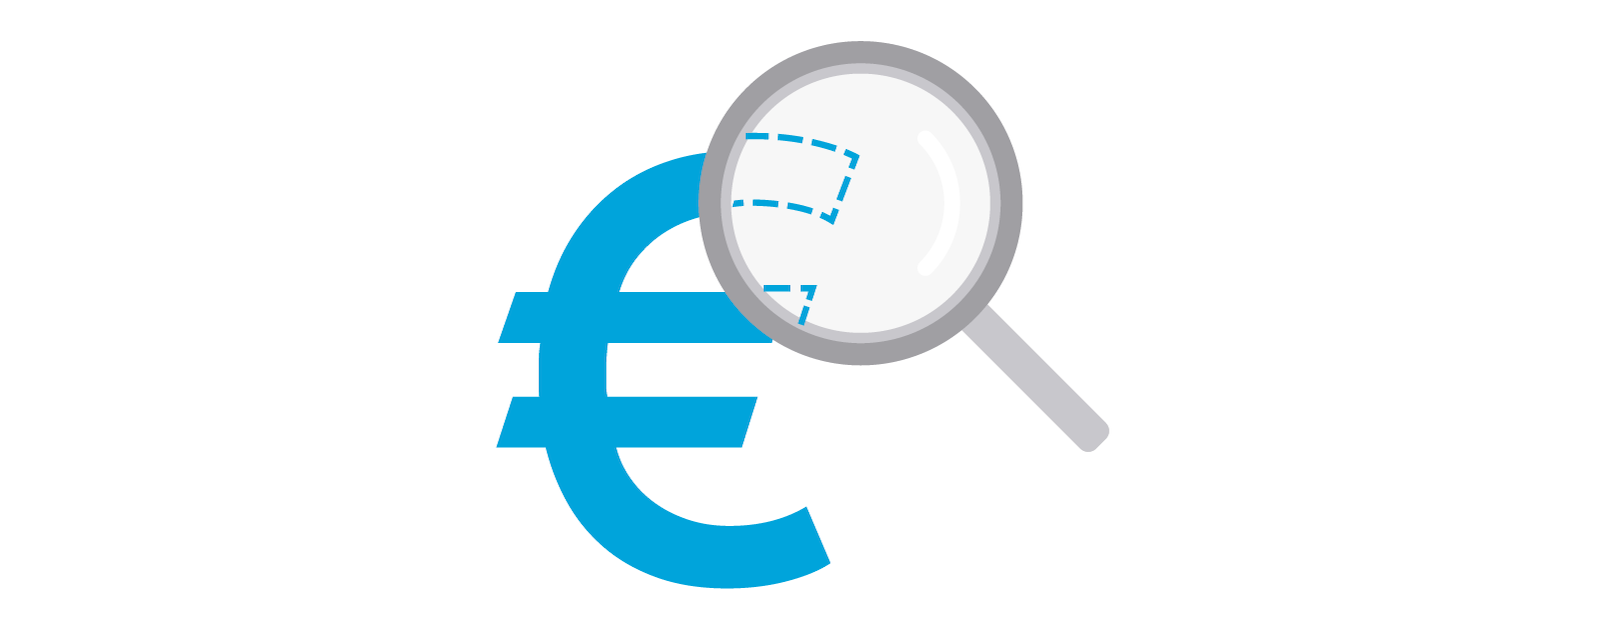 Illustration showing a Euro sign with a magnifying glass over it